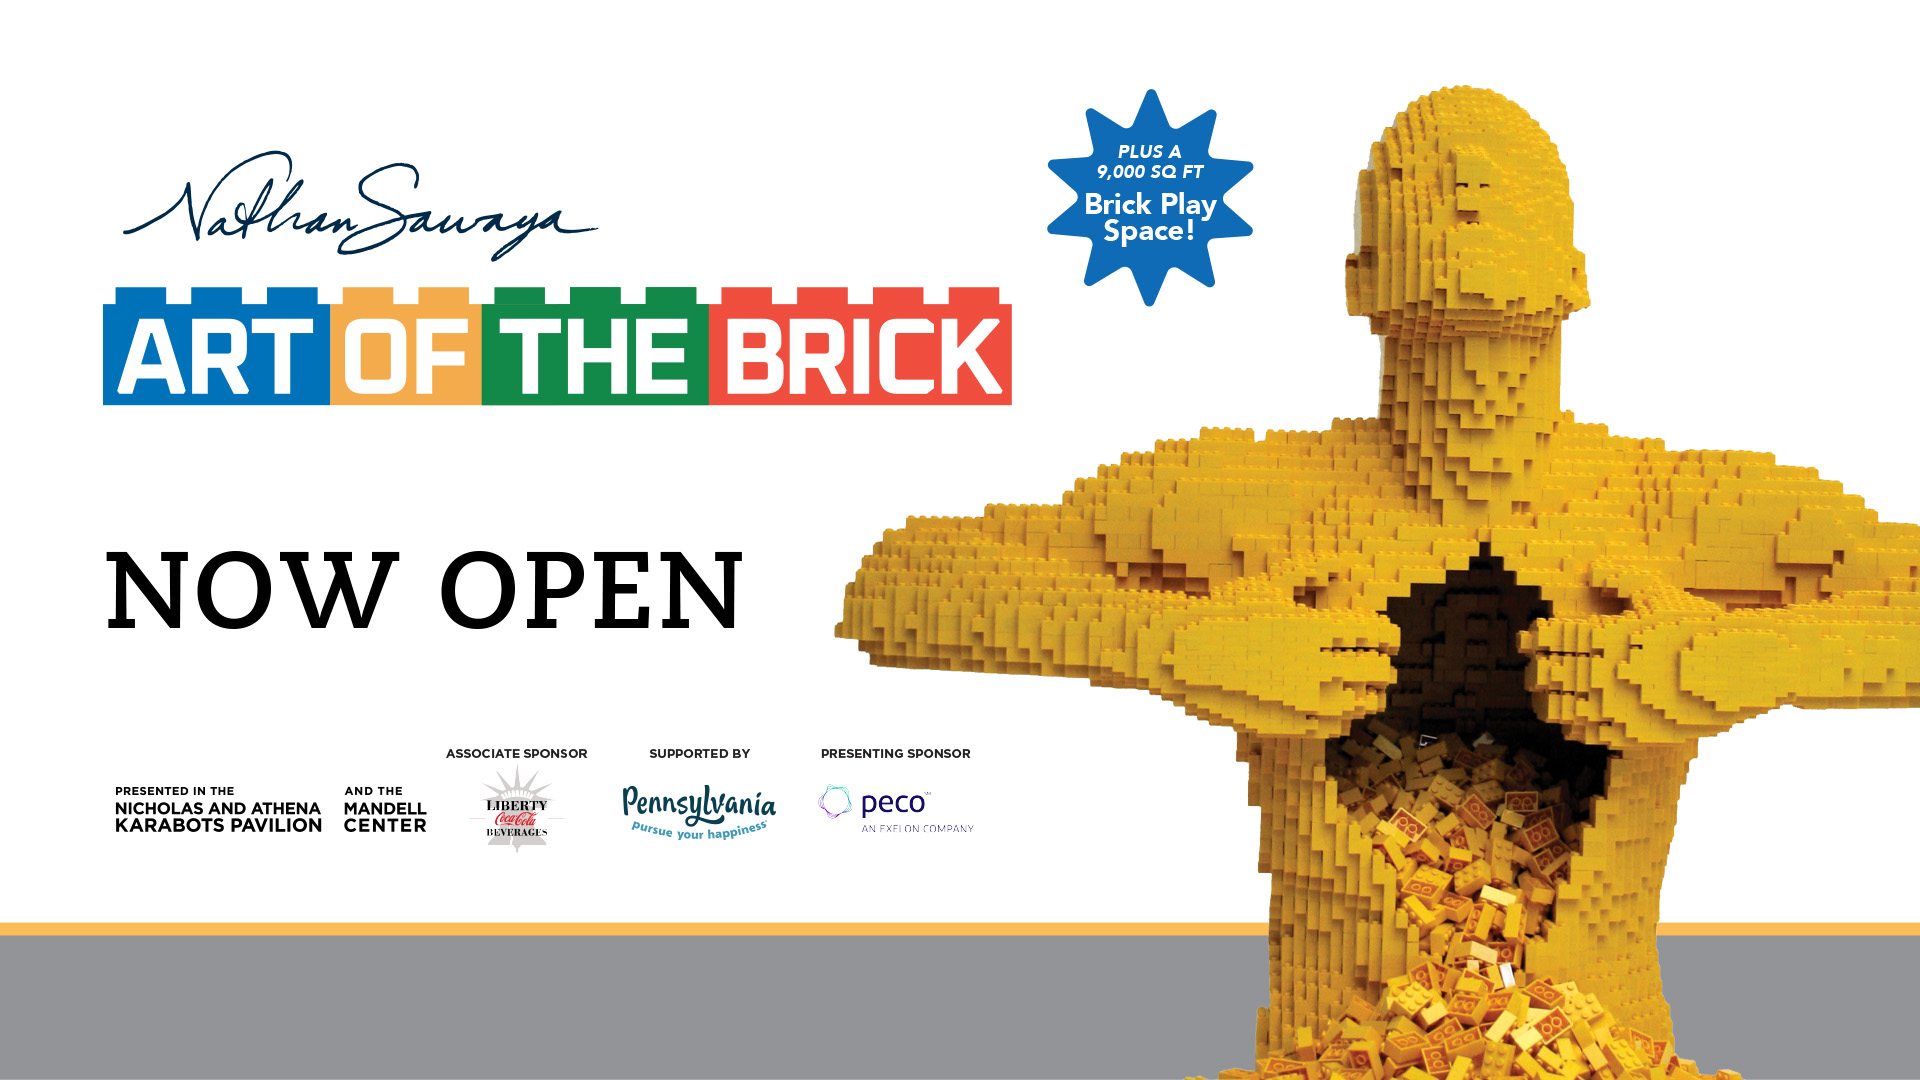 The Art of the Brick - Now Open